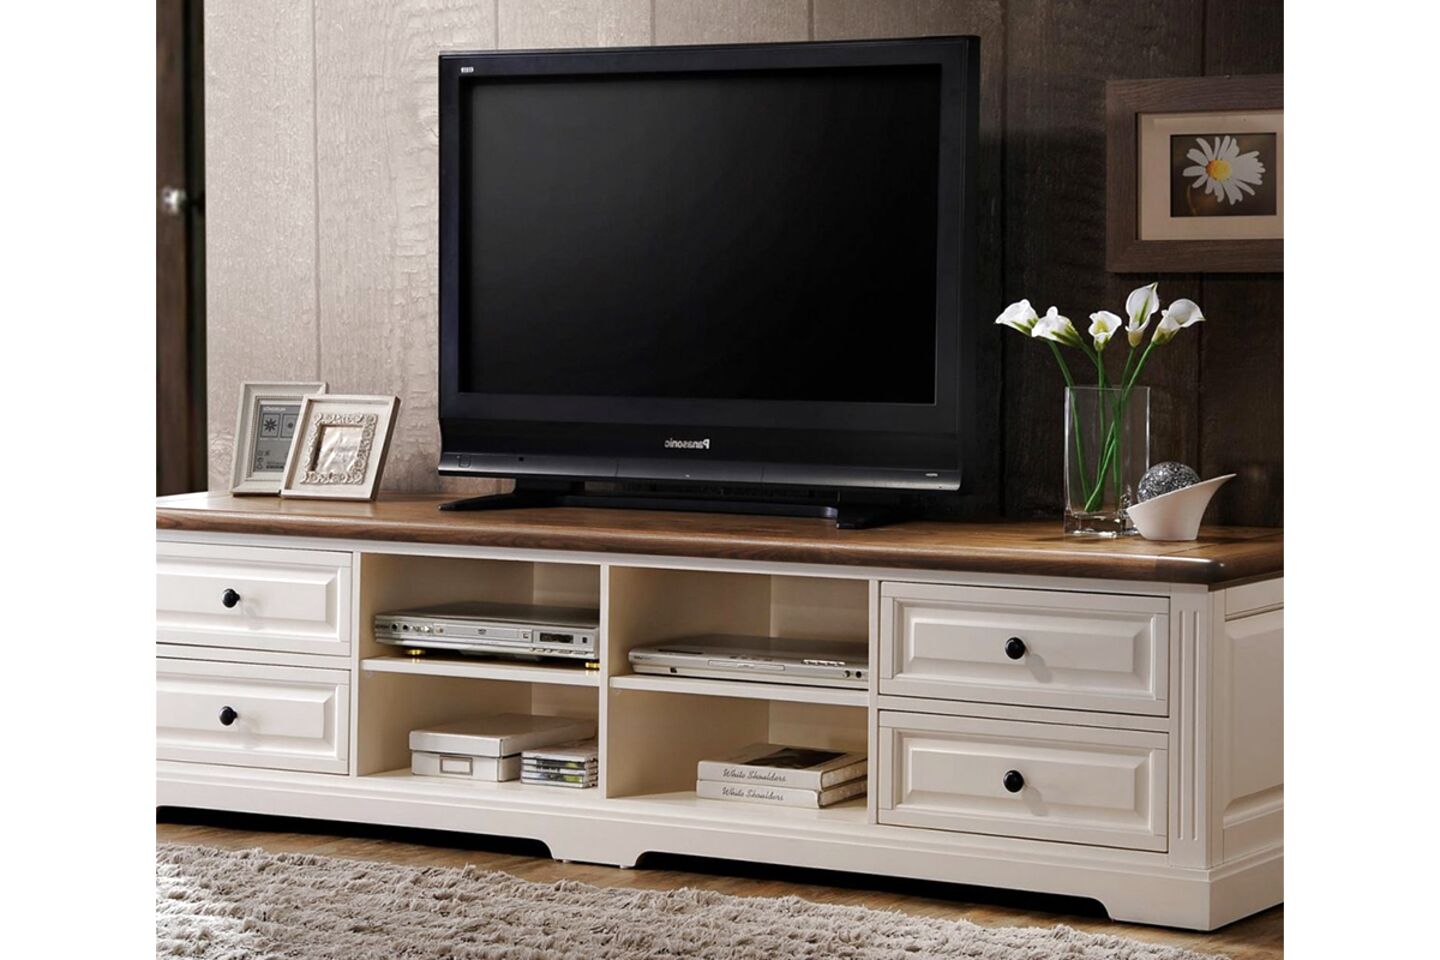 Tv Cabinet For Sale In Uk 80 Second Hand Tv Cabinets